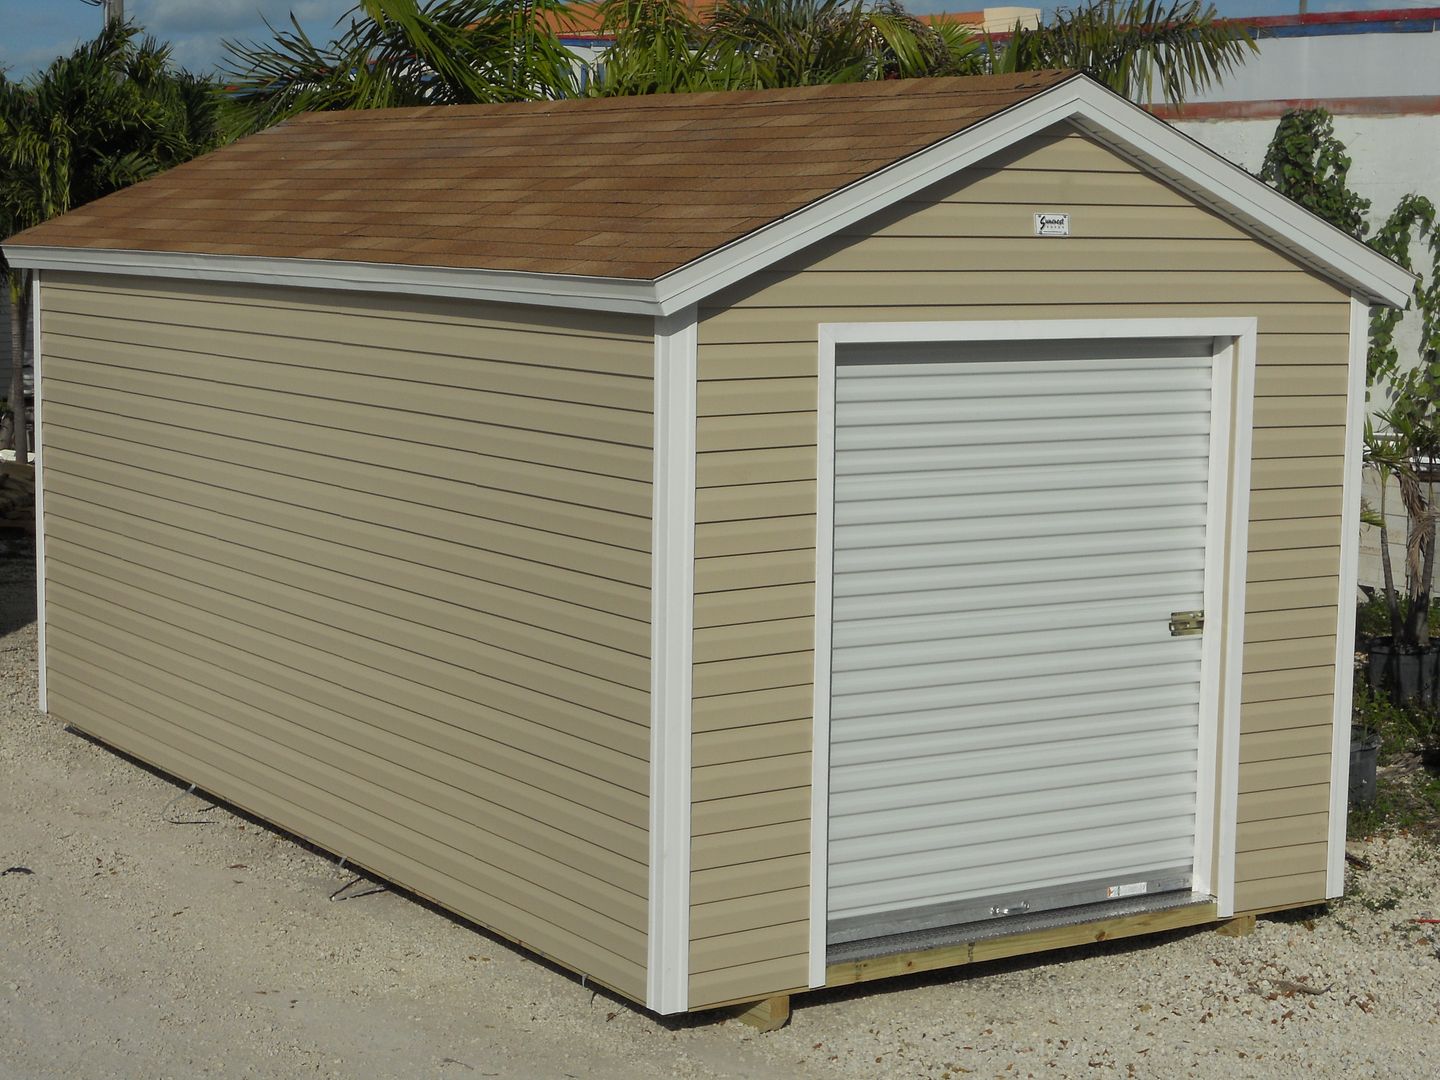 go see the other sheds then come to us to compare if quality matters 